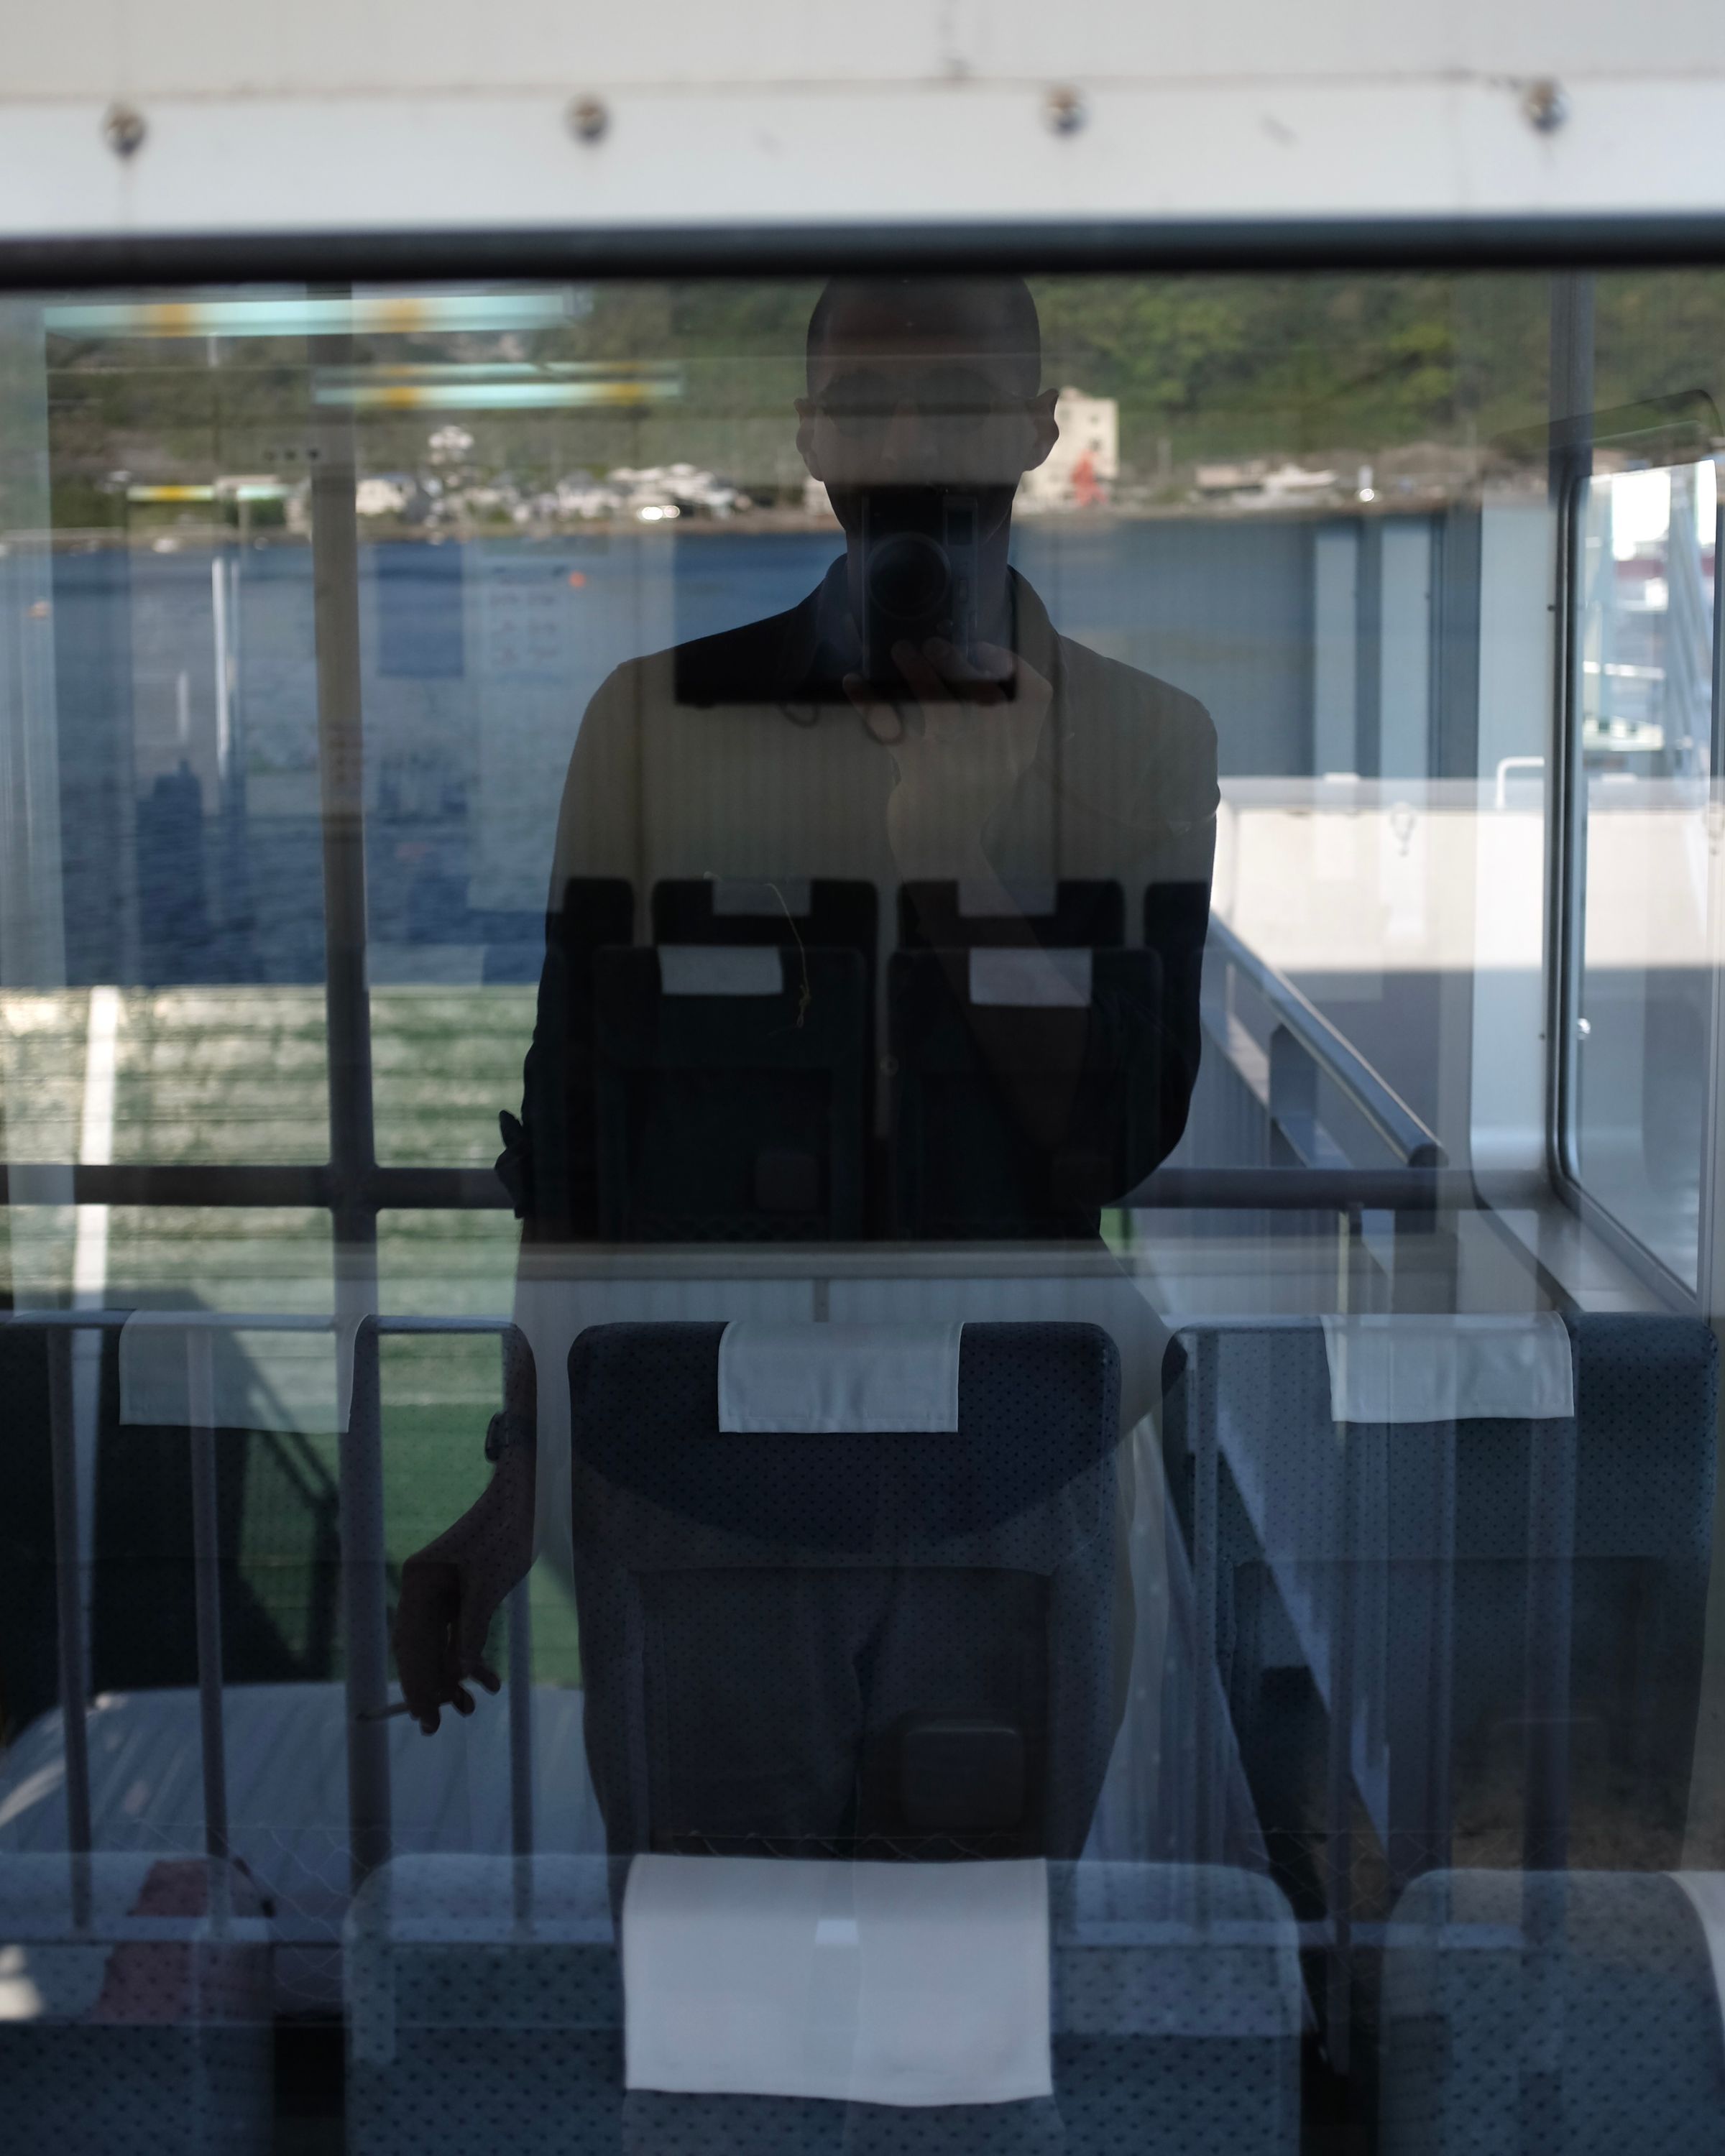 The author reflected in the window of a ferry.